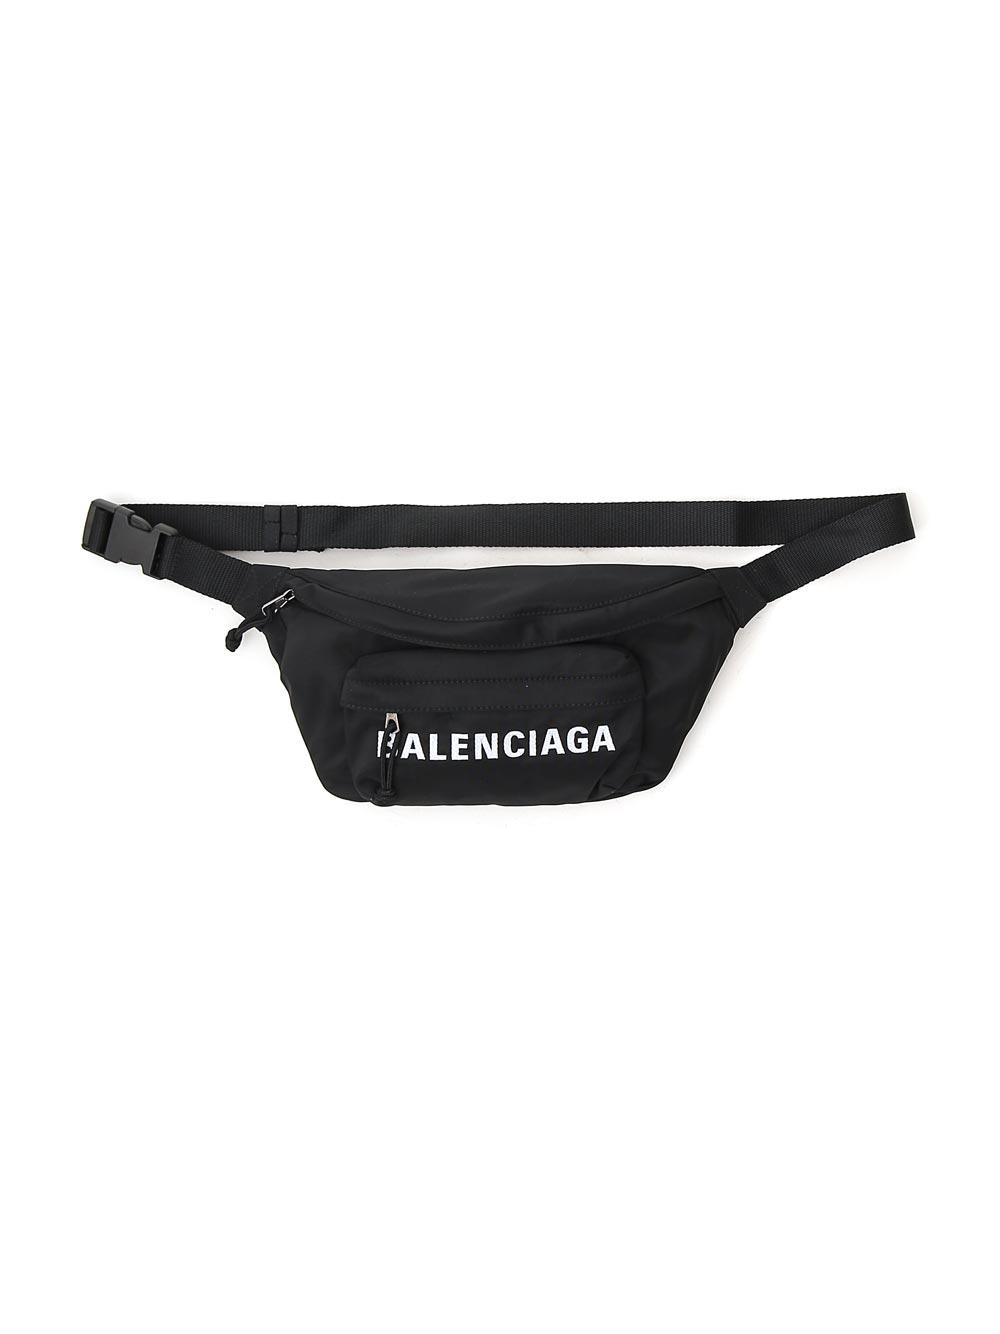 Balenciaga Synthetic Everyday Beltpack in Black for Men | Lyst